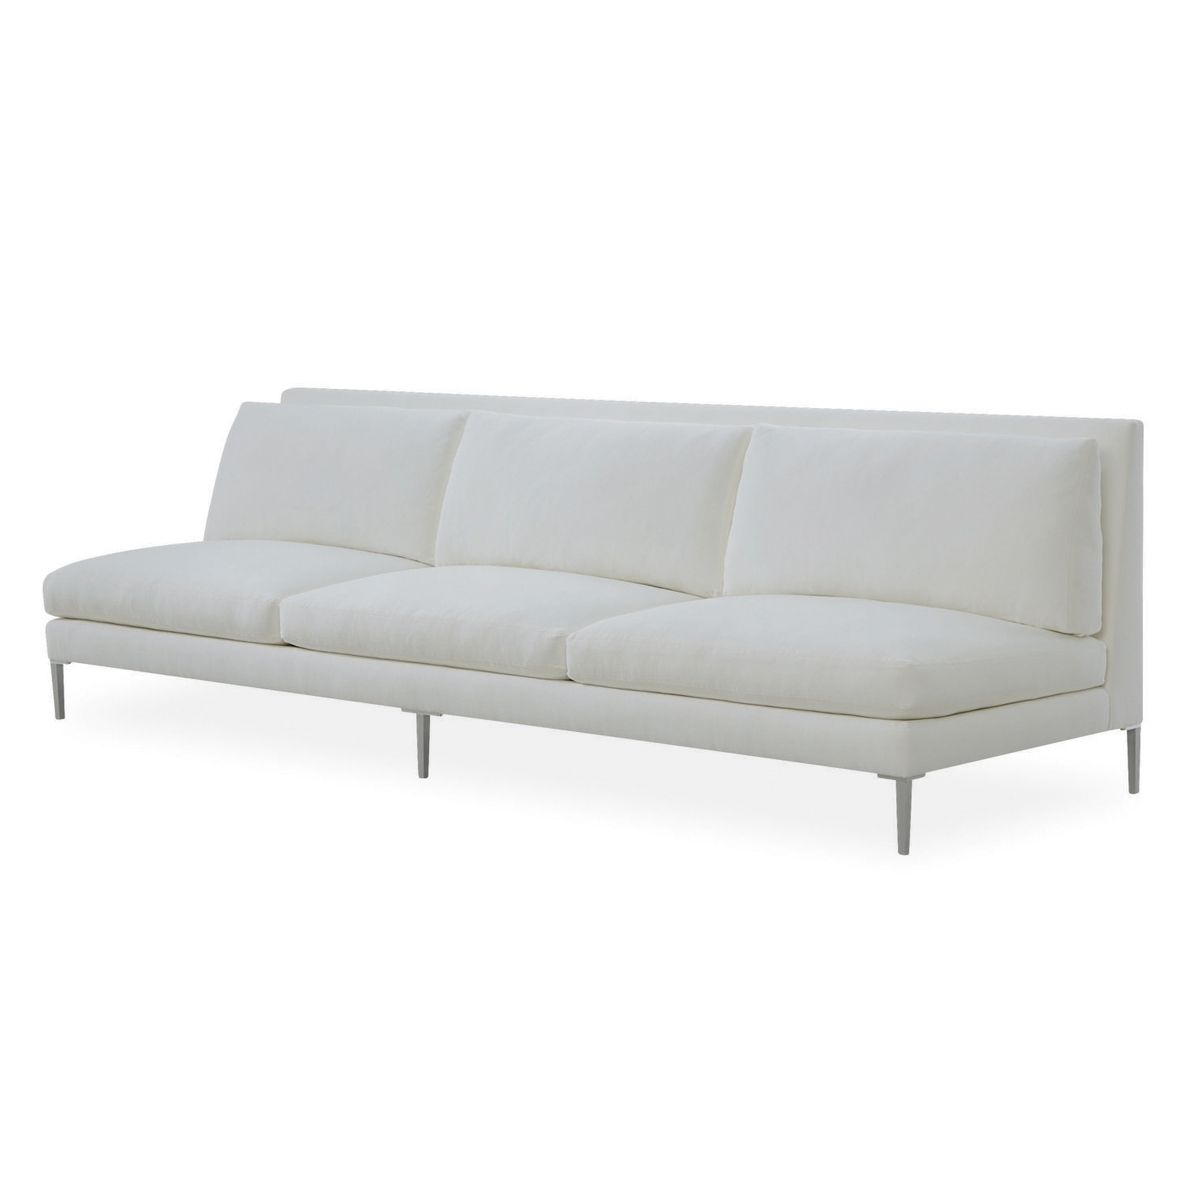 Most Recent Small Armless Sofas Throughout Sofa : White Armless Sofa Corner Sofa Bed Small Sofa Bed Armless (View 17 of 20)